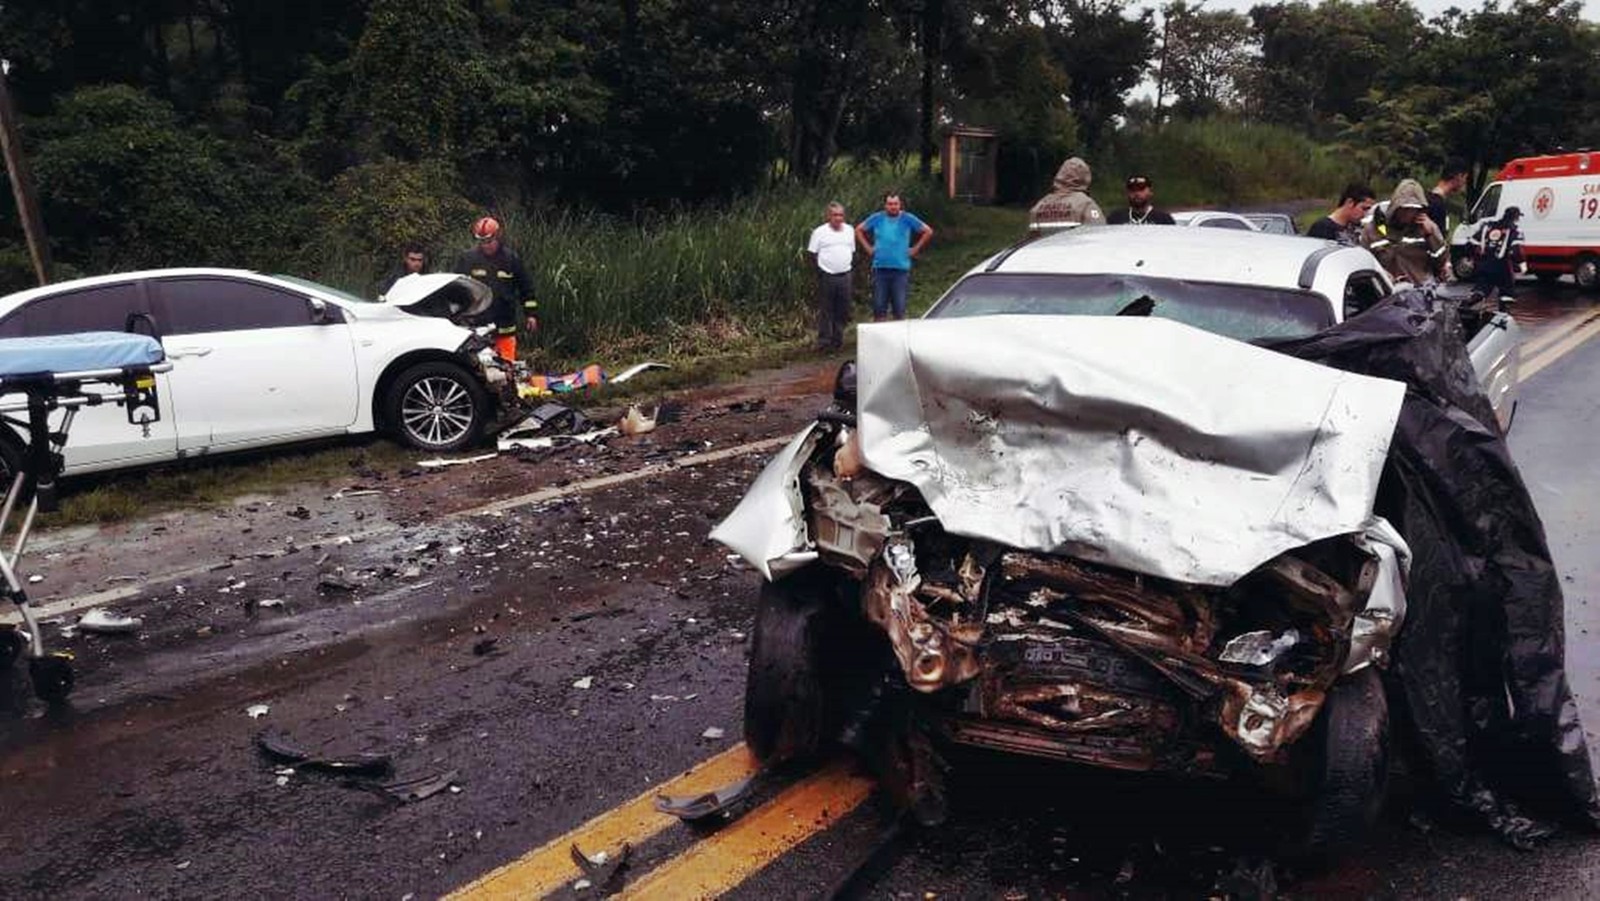 The second most fatal type of accident in Rio State was vehicle collisions.